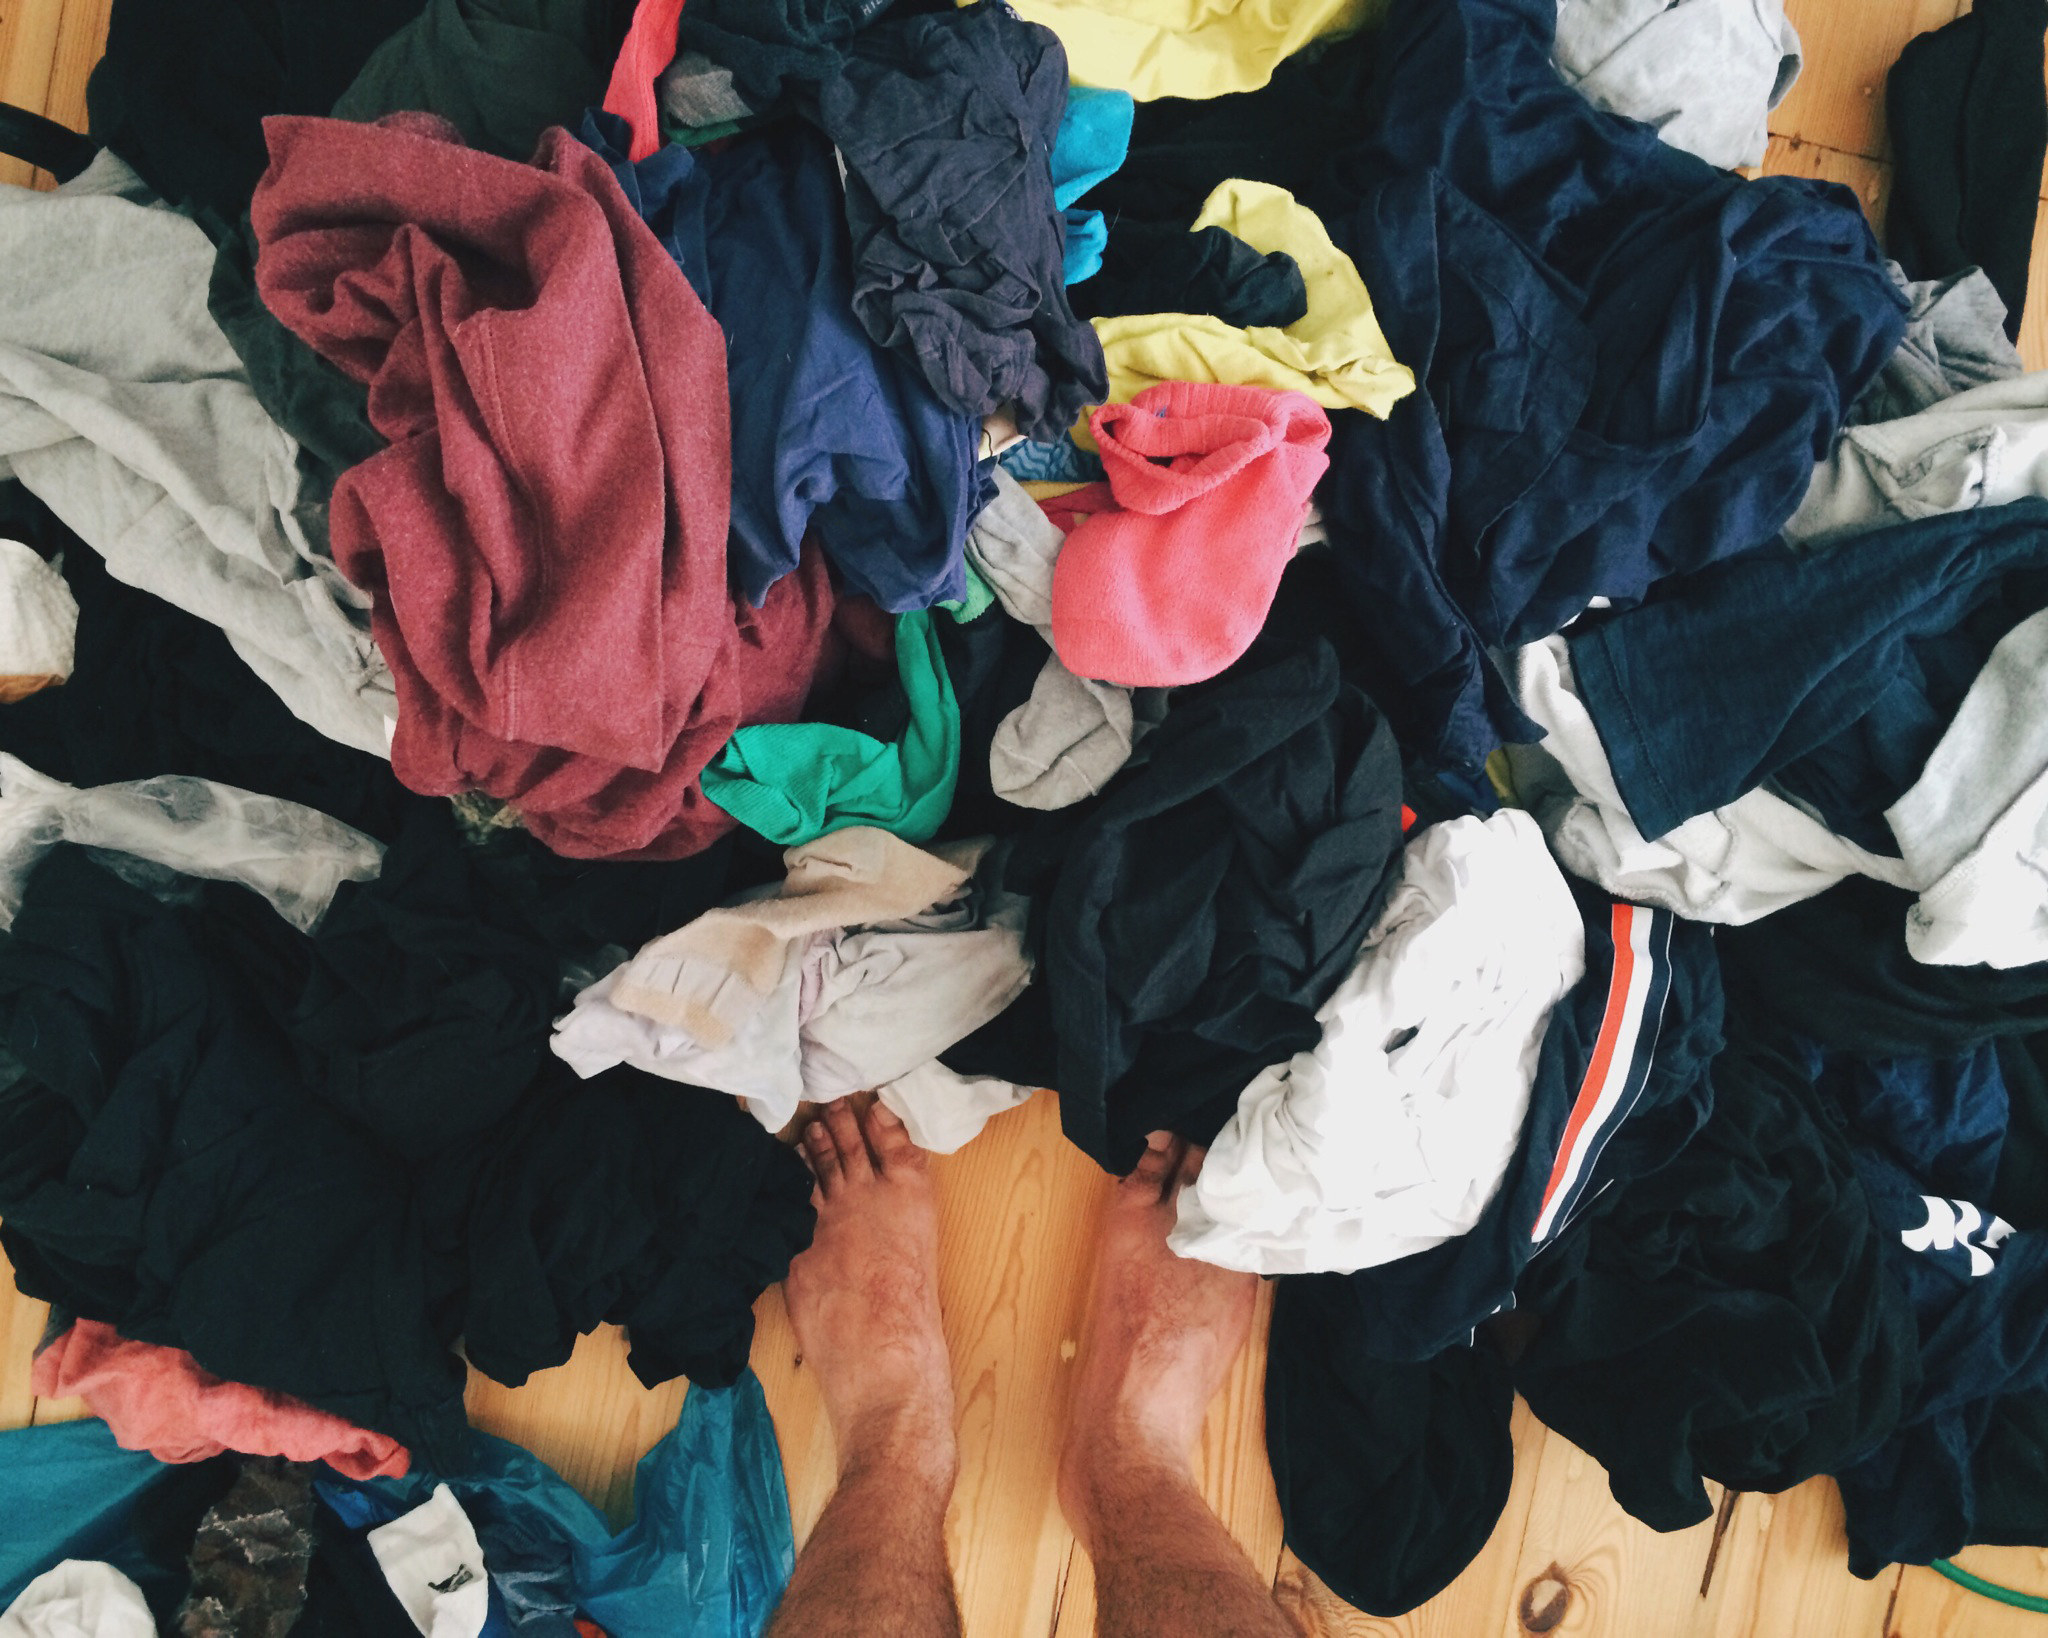 Standing above a messy pile of laundry